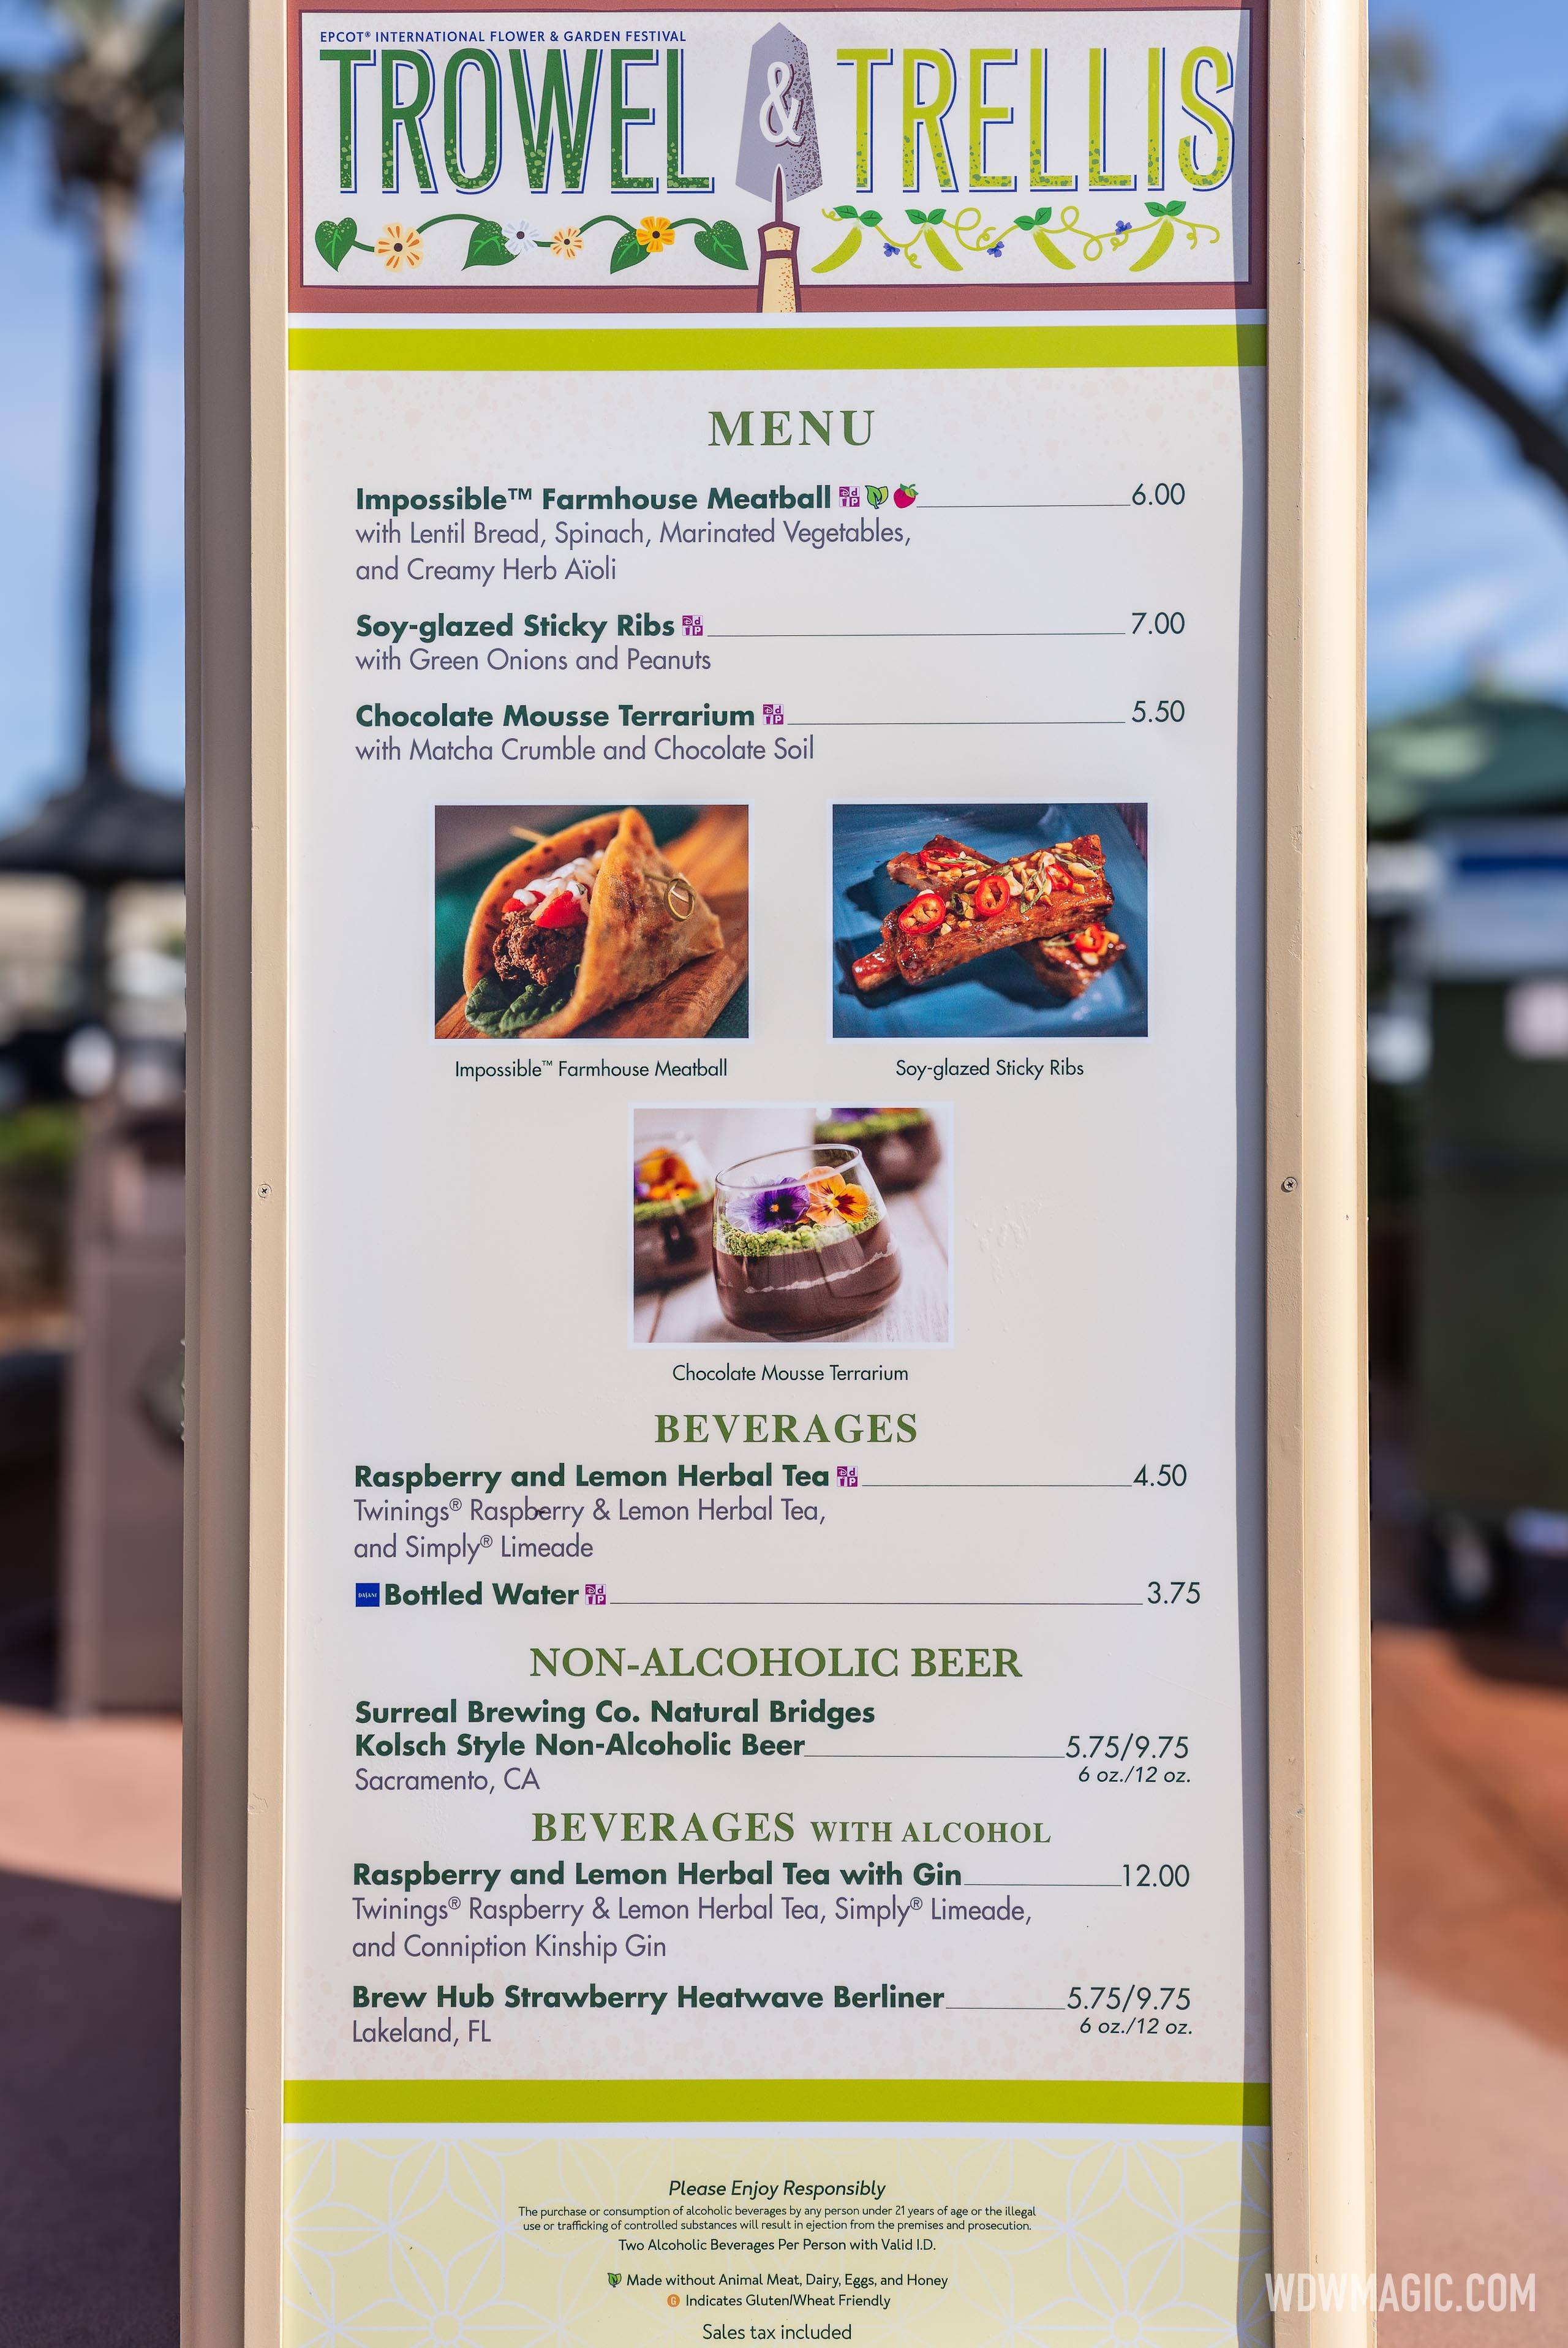 2024 EPCOT International Flower and Garden Festival Outdoor Kitchens menus and prices